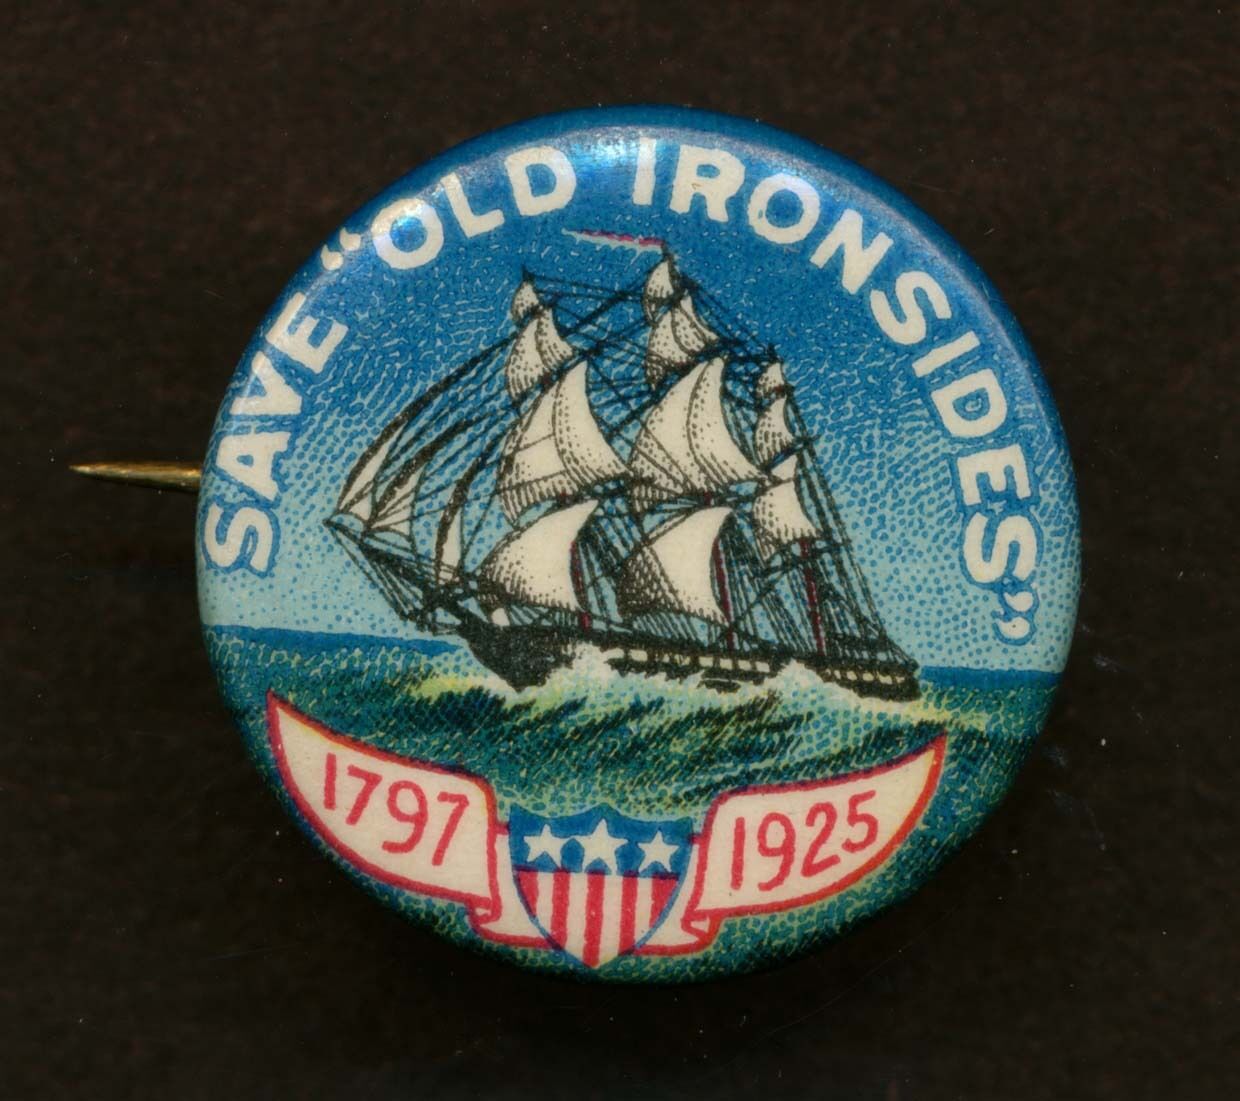 1925 US Navy Frigate, USS Constitution, Save Old Ironsides Button